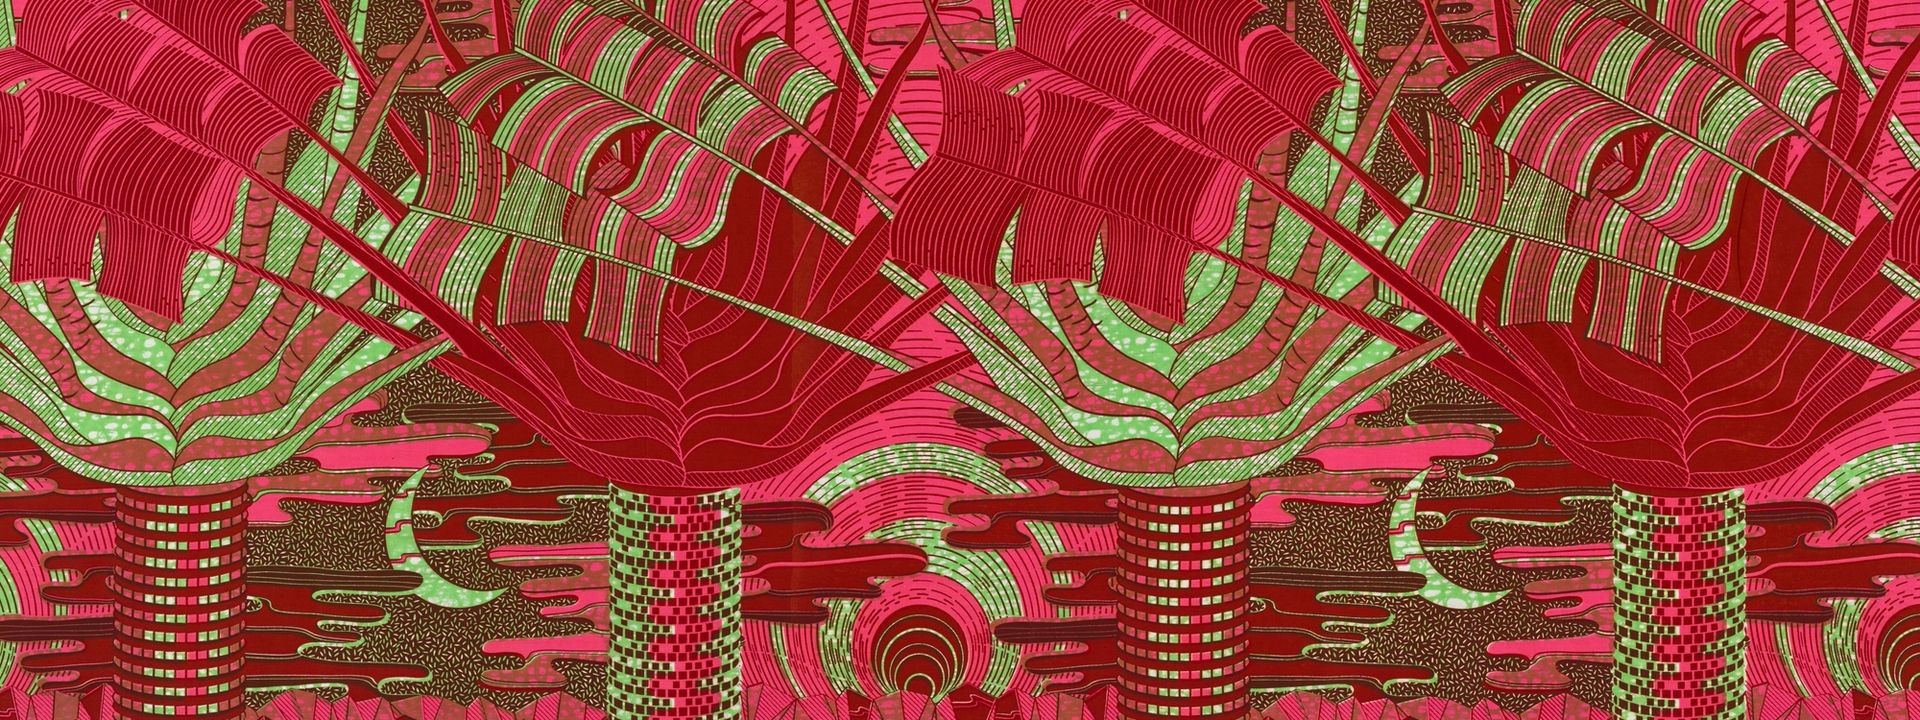 Printed Textile, 2015-16, made by Vlisco